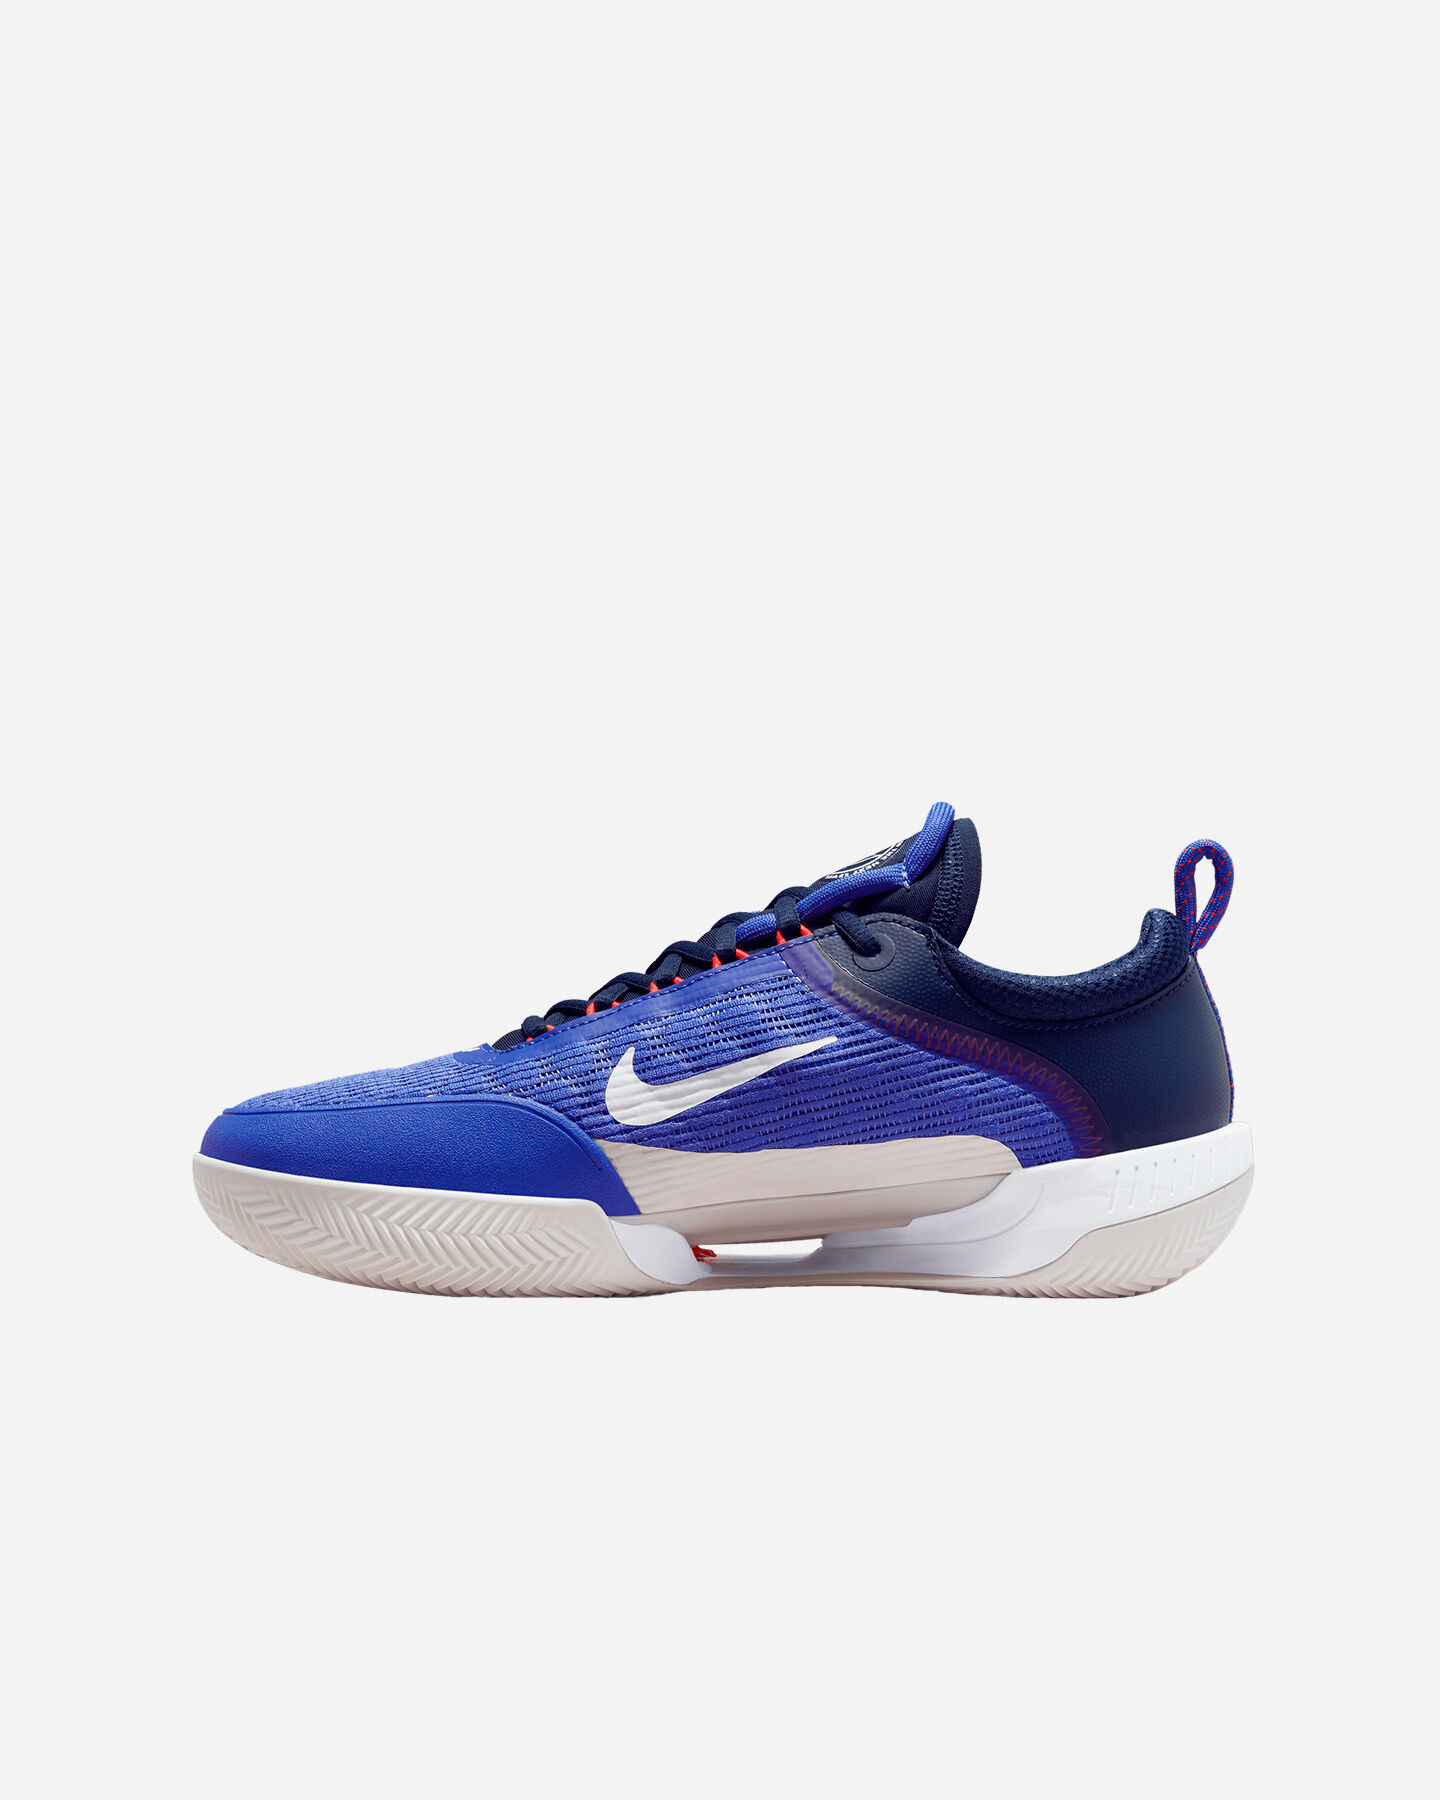  Scarpe tennis NIKE COURT ZOOM NXT CLAY M S5455415|400|6 scatto 2